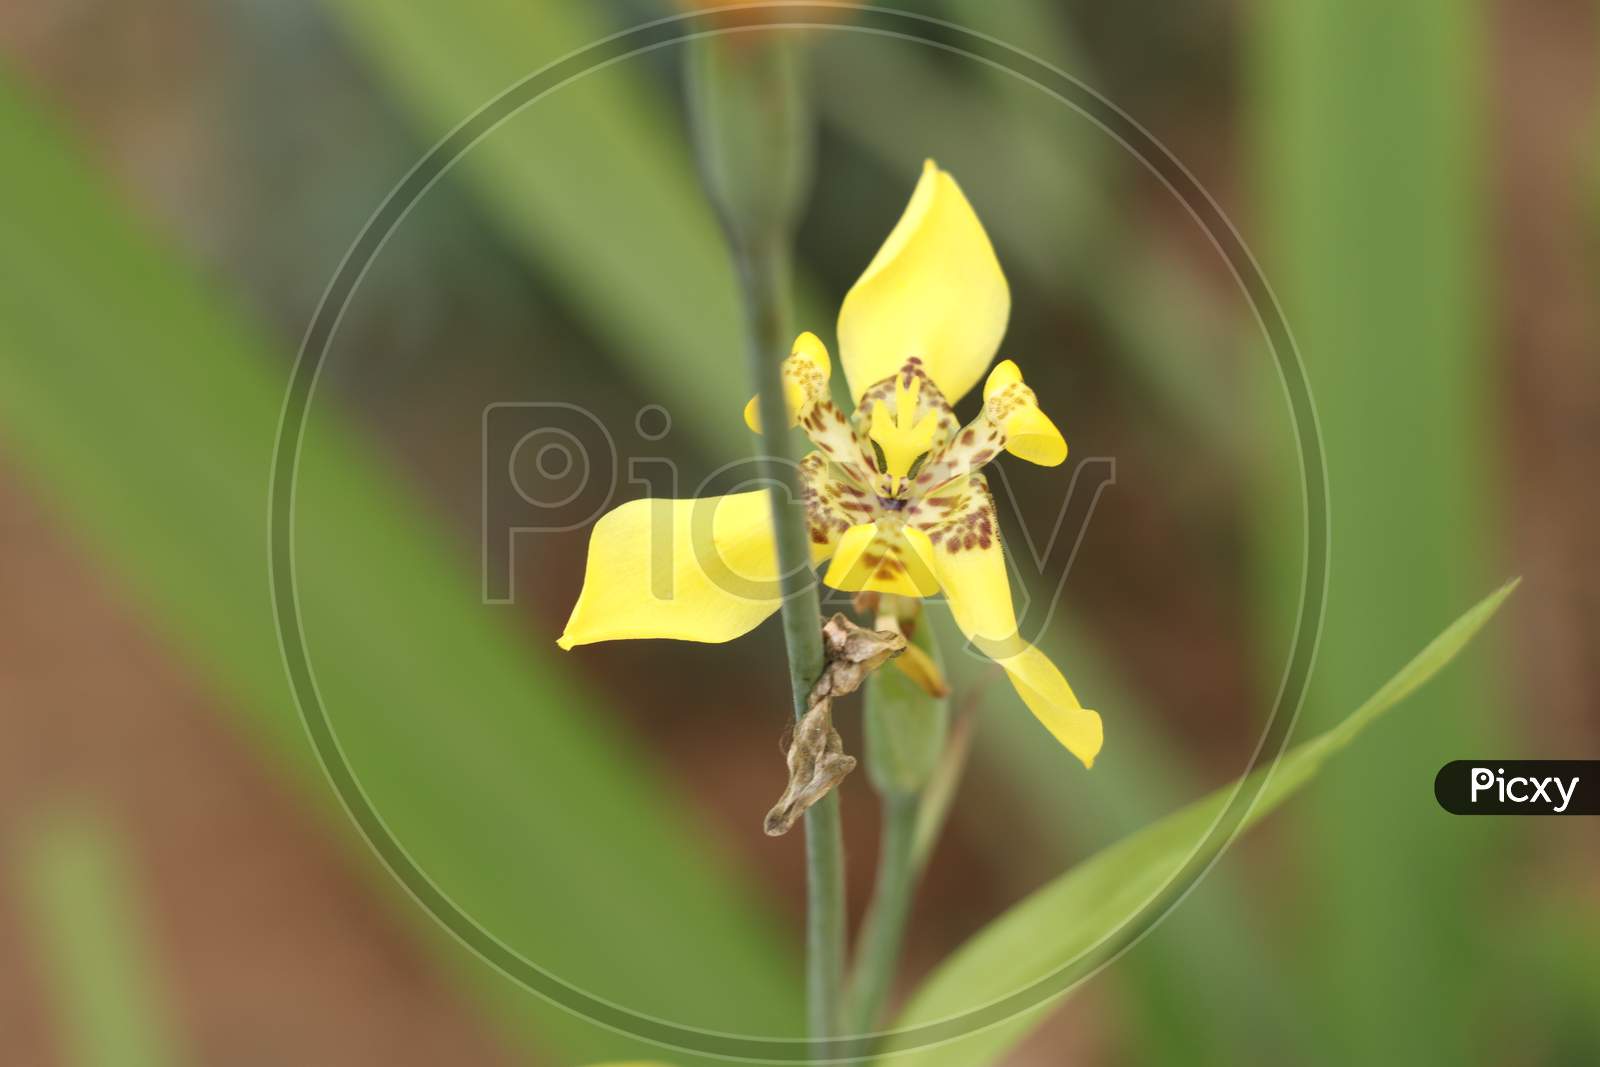 Yellow Flower With Green Soft Background In The Garden, Looks Nice And Mind Blowing